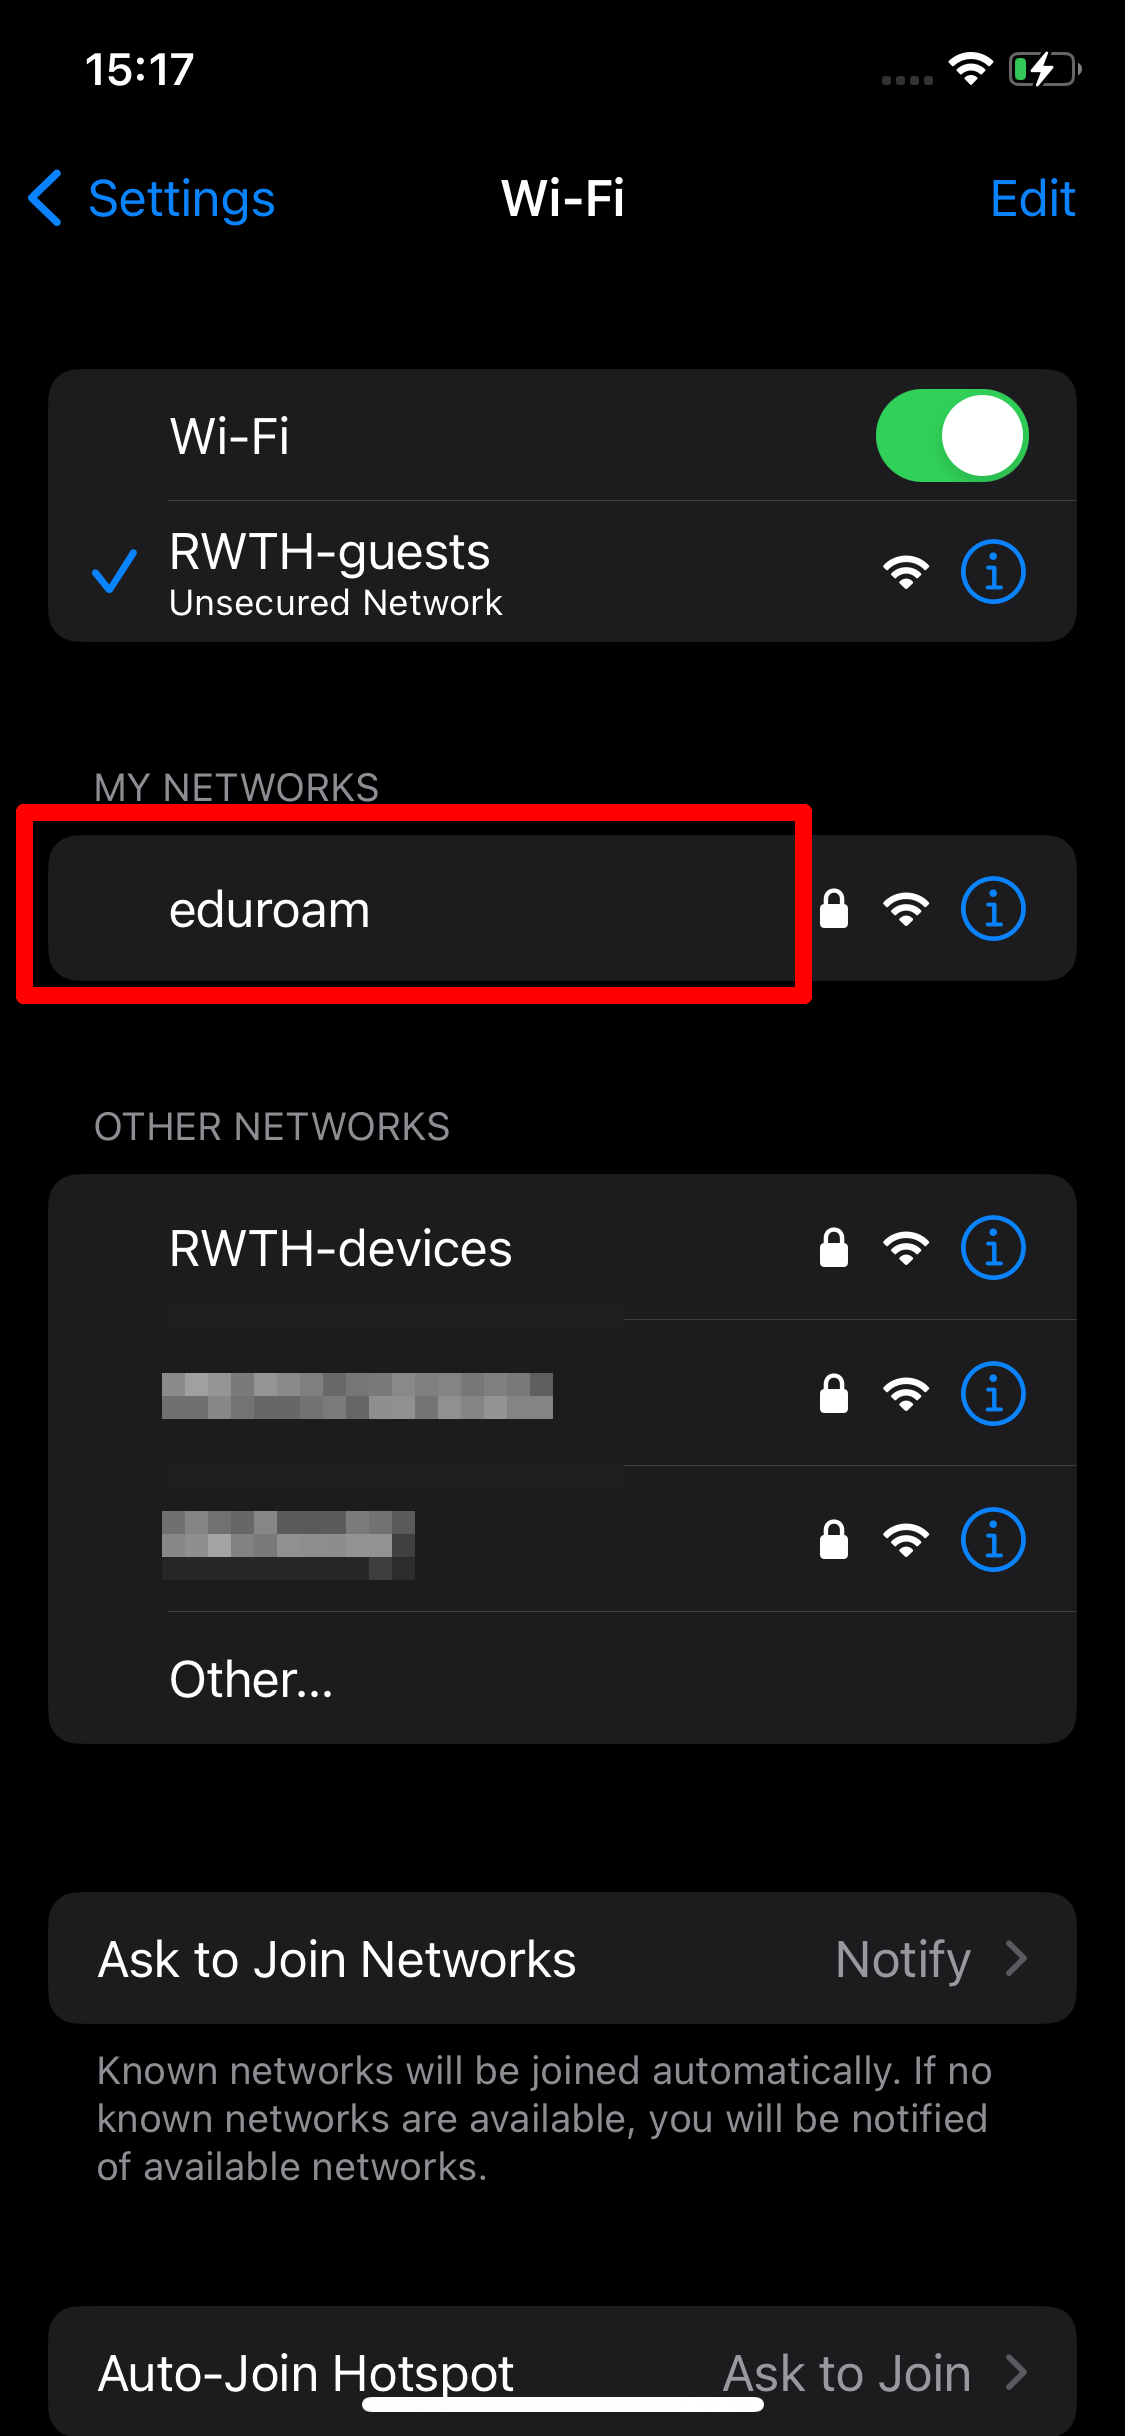 Selecting the eduroam network to connect